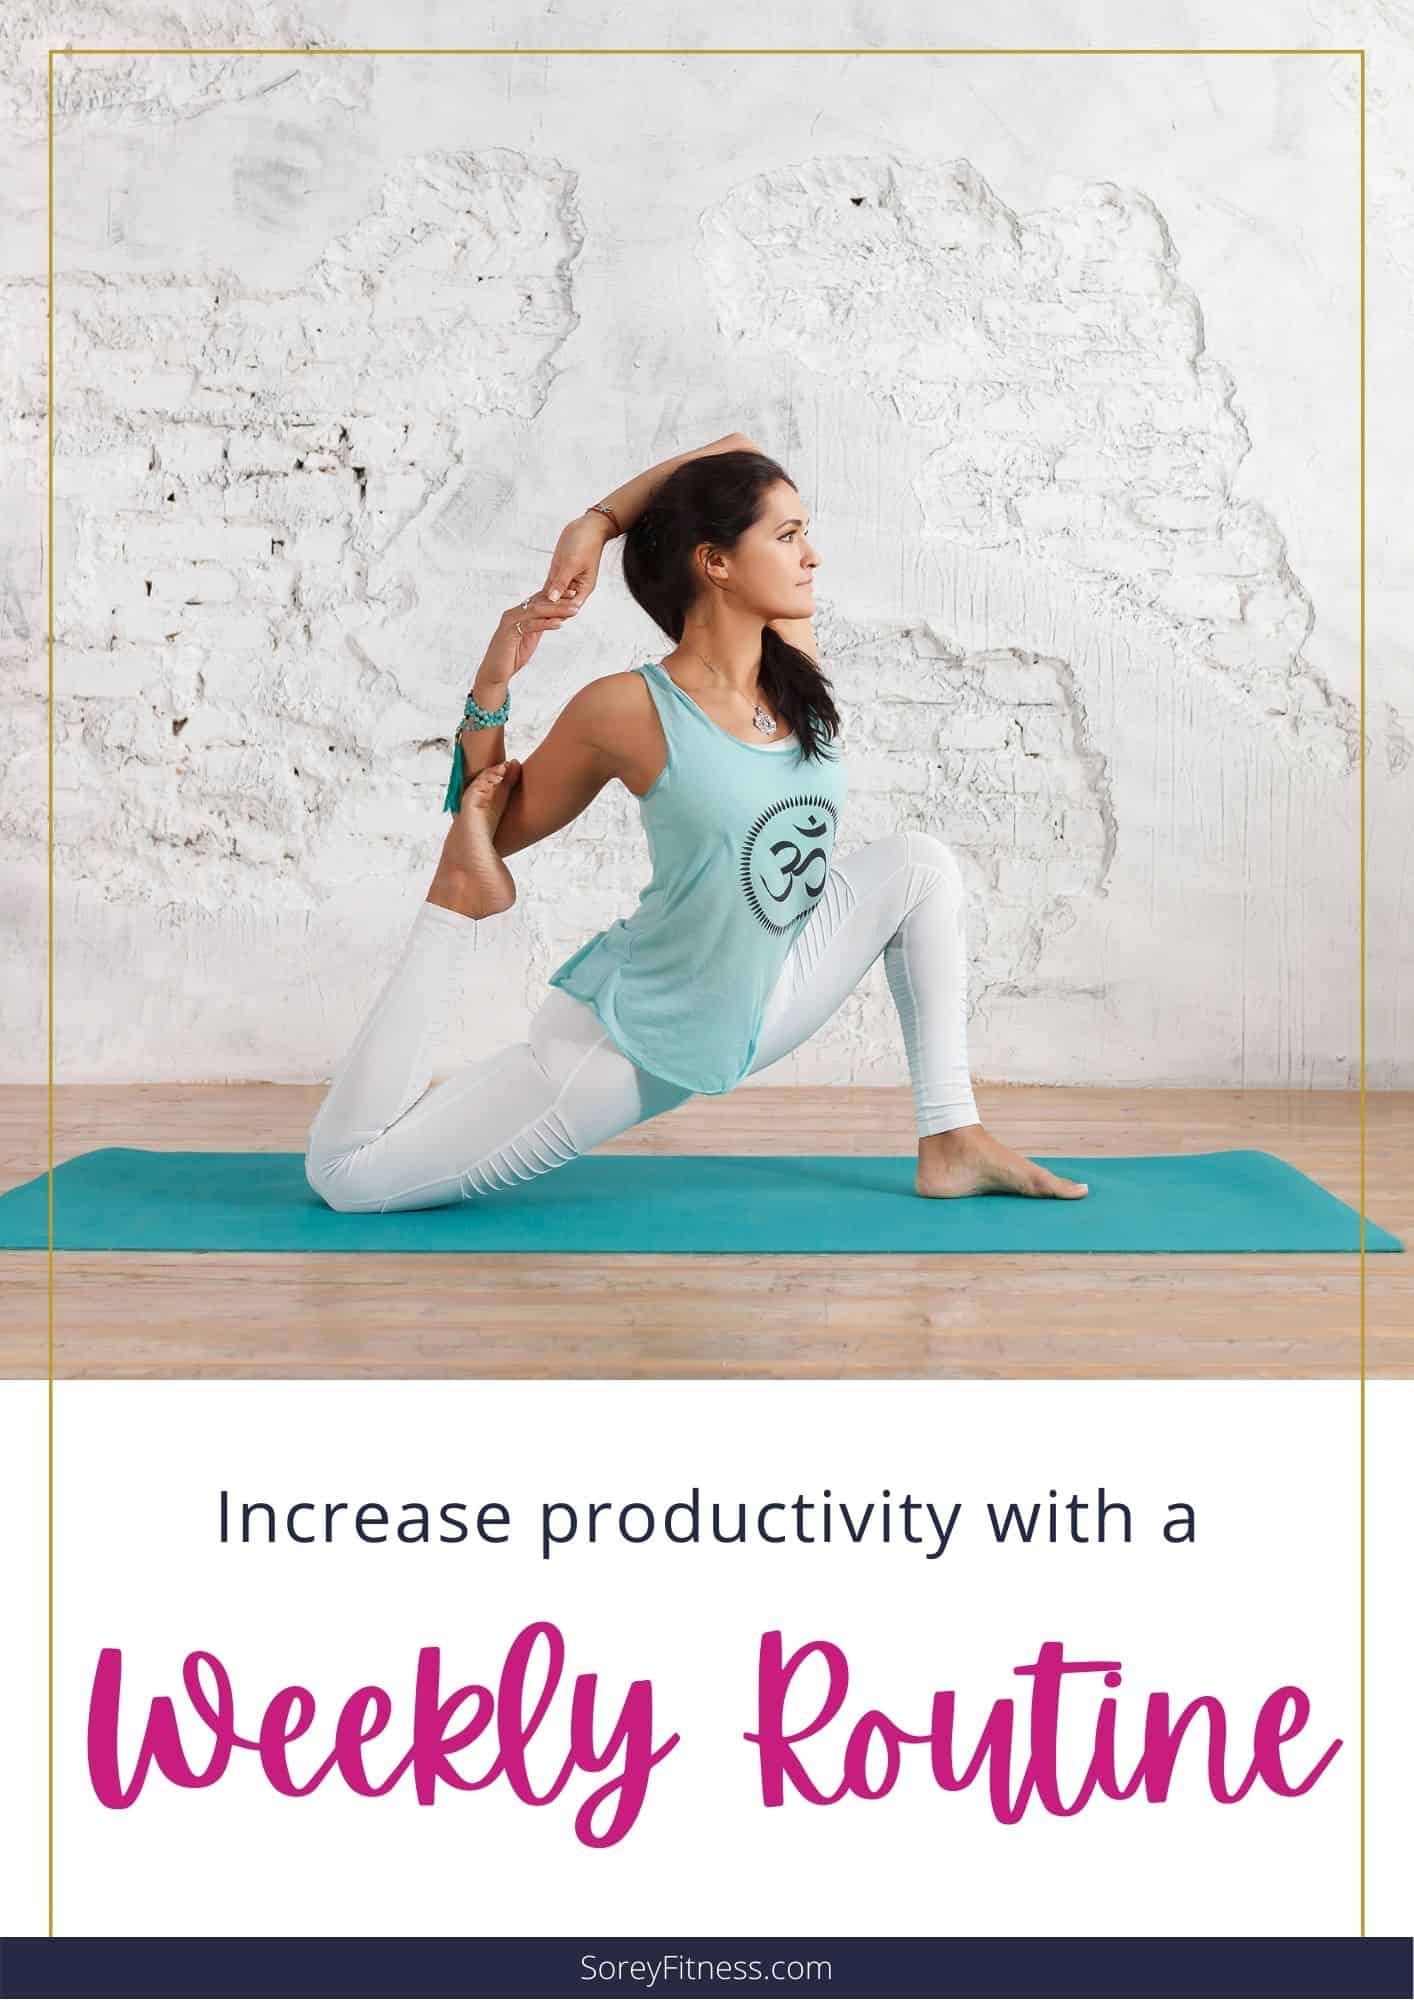 photo of woman doing yoga with text overlay that says "increase productivity with a weekly routine"